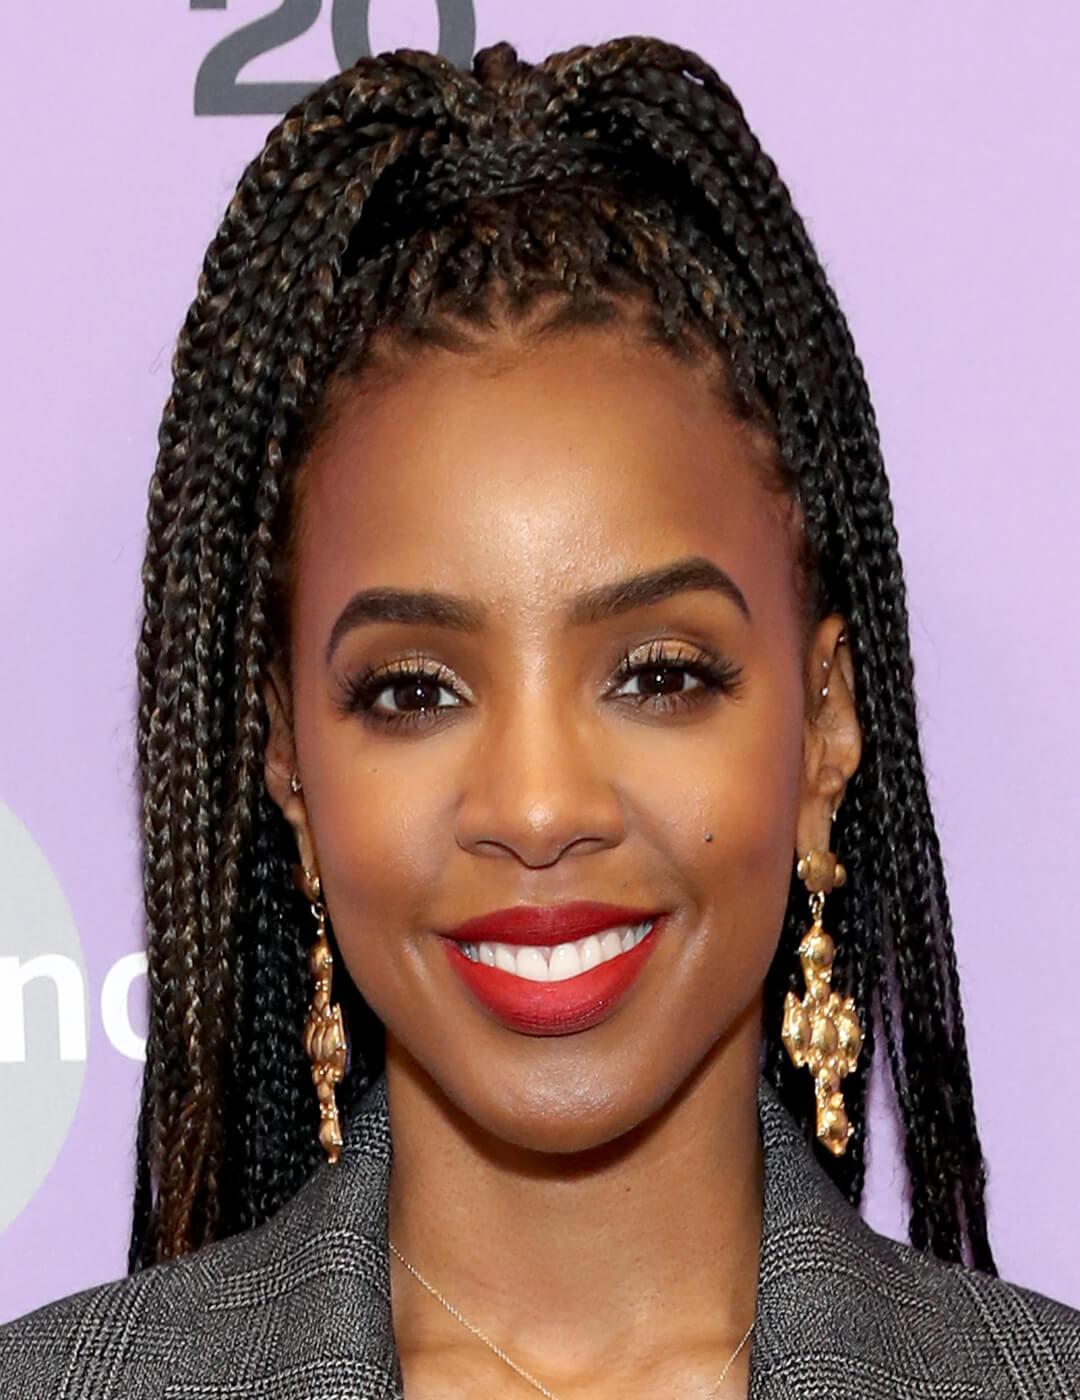 Kelly Rowland rocking a braided high ponytail hairstyle